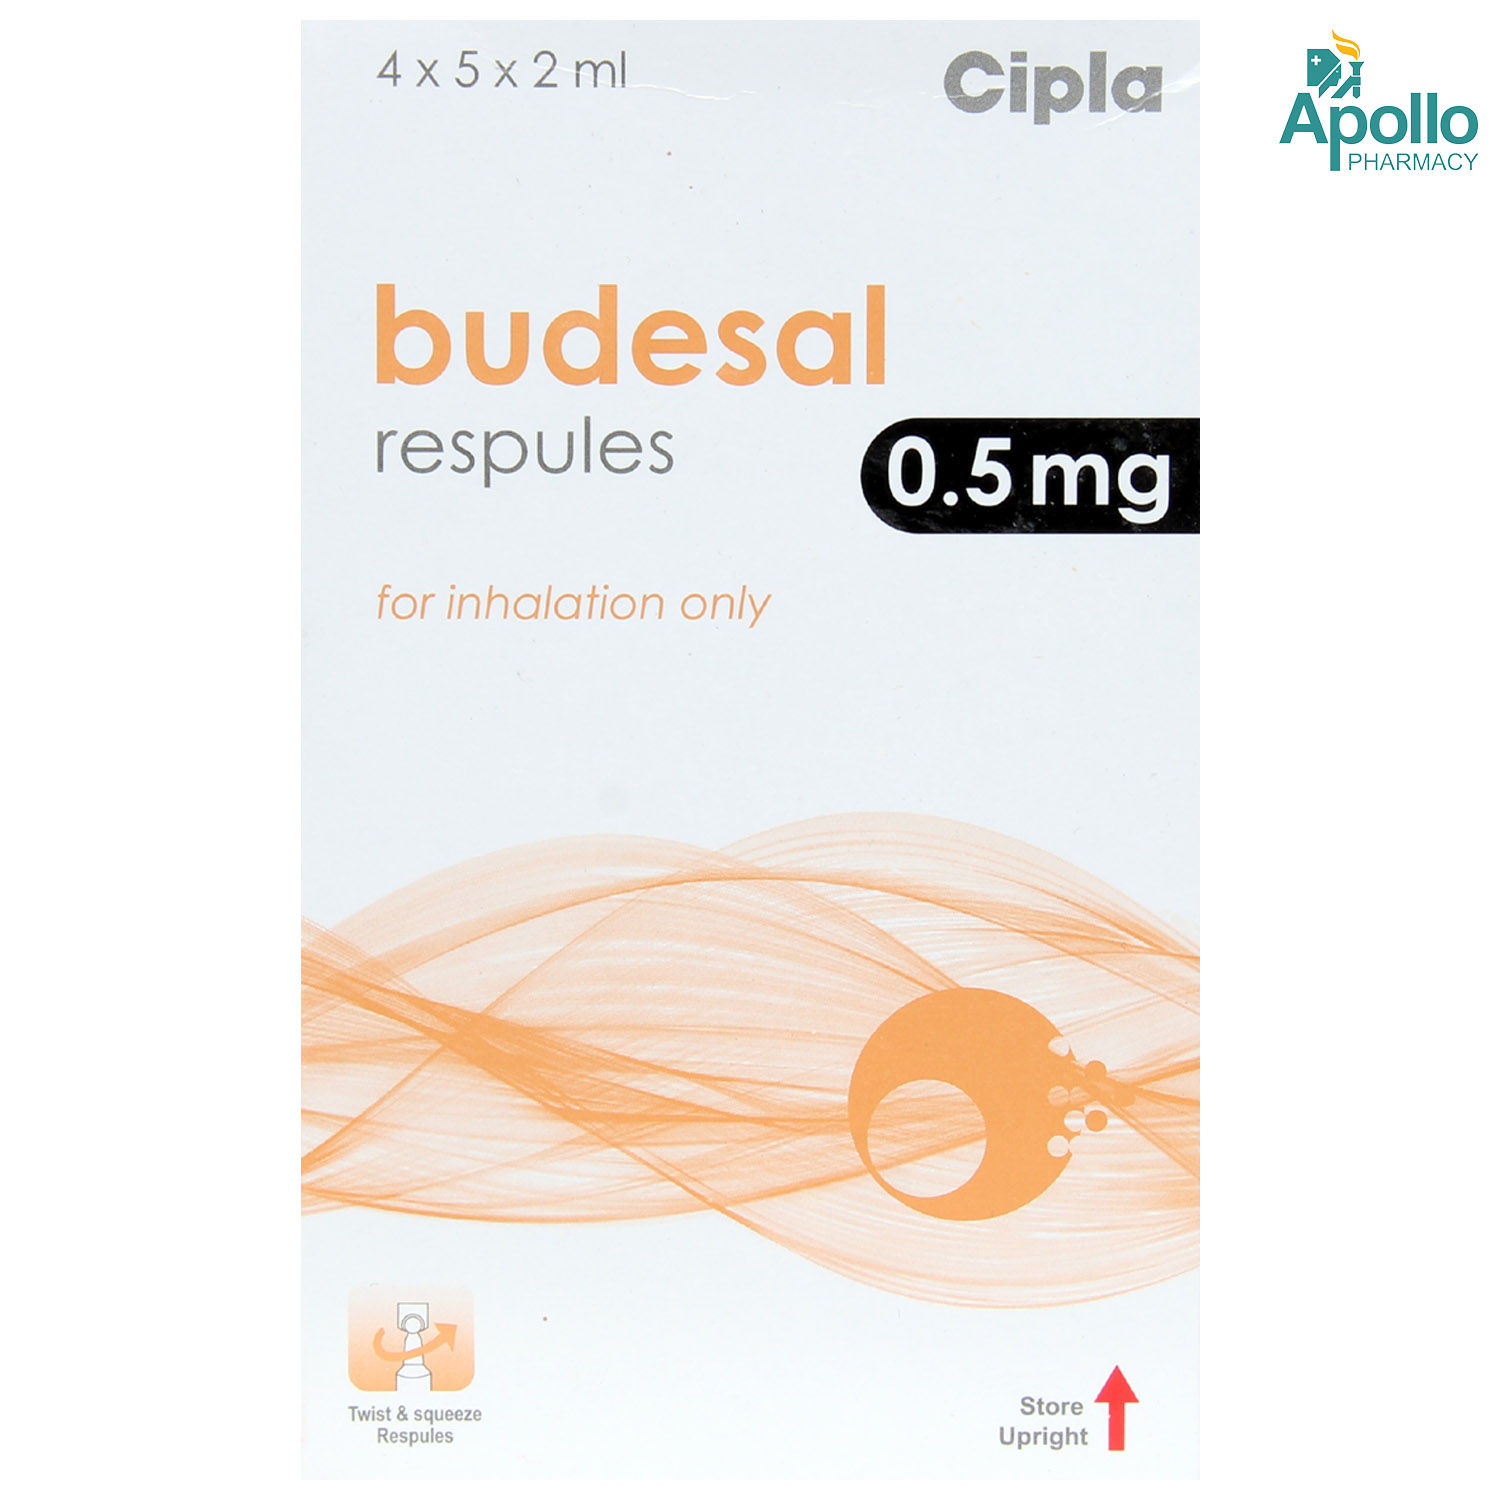 LEVOSALBUTAMOL SULPHATE+AMBROXOL HYDROCHLORIDE+GUAIPHENESIN Uses, Side Effects and Medicines Apollo Pharmacy picture